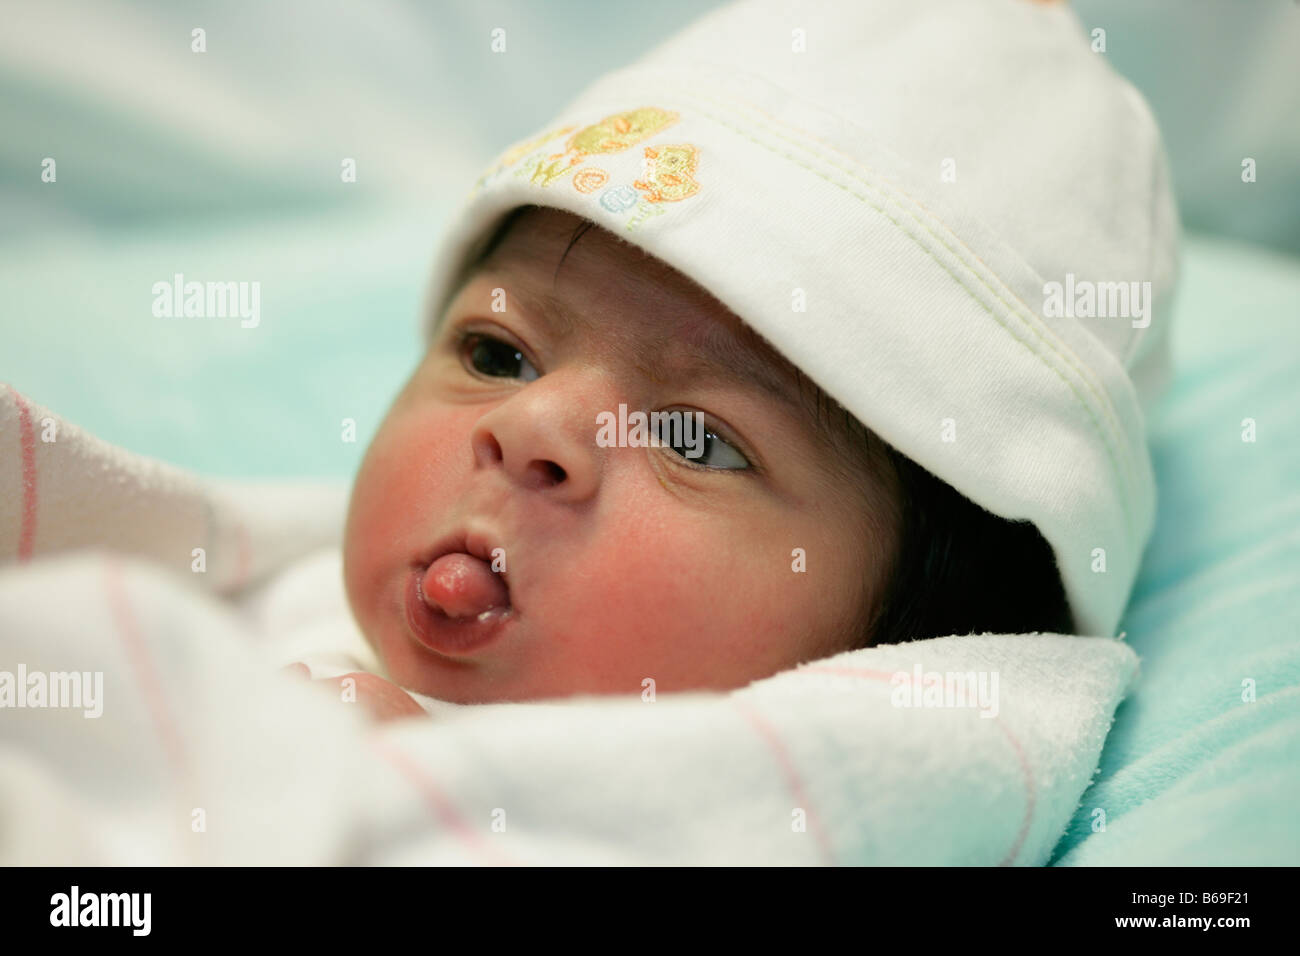 Two day old baby girl sticks her tongue out in a confident, playful gesture. Stock Photo